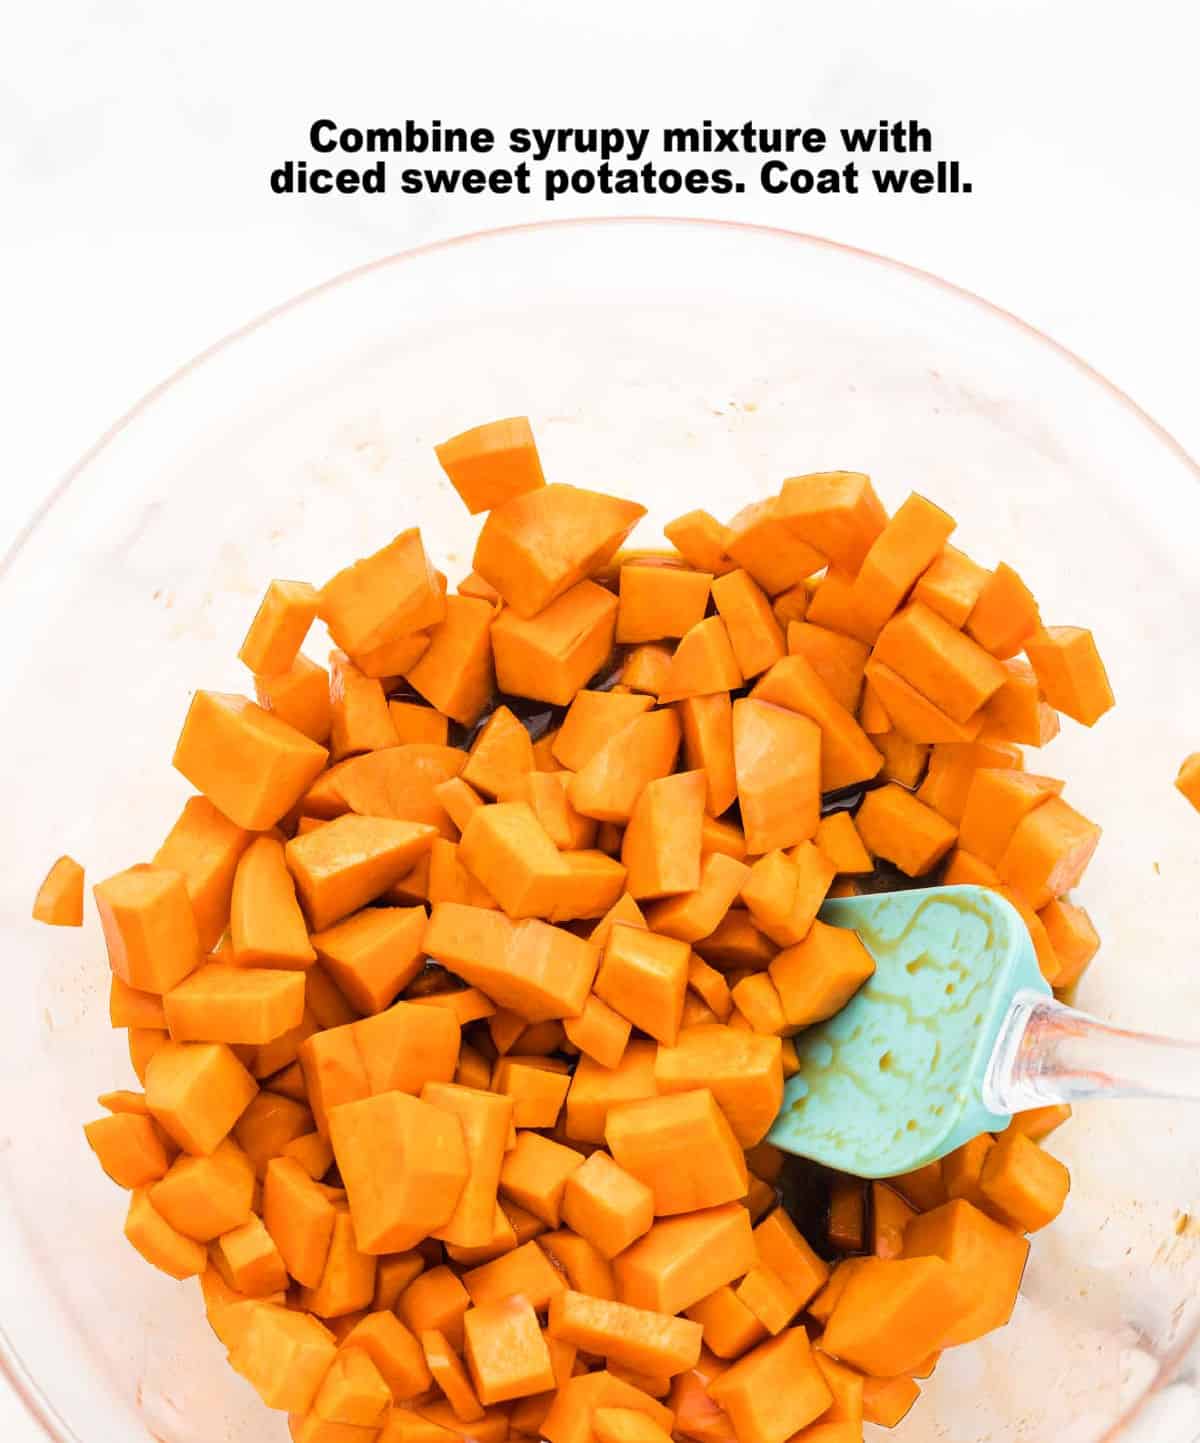 Process Step: Diced sweet potatoes in a glass bowl tossed in the sugar & vinegar mixture.